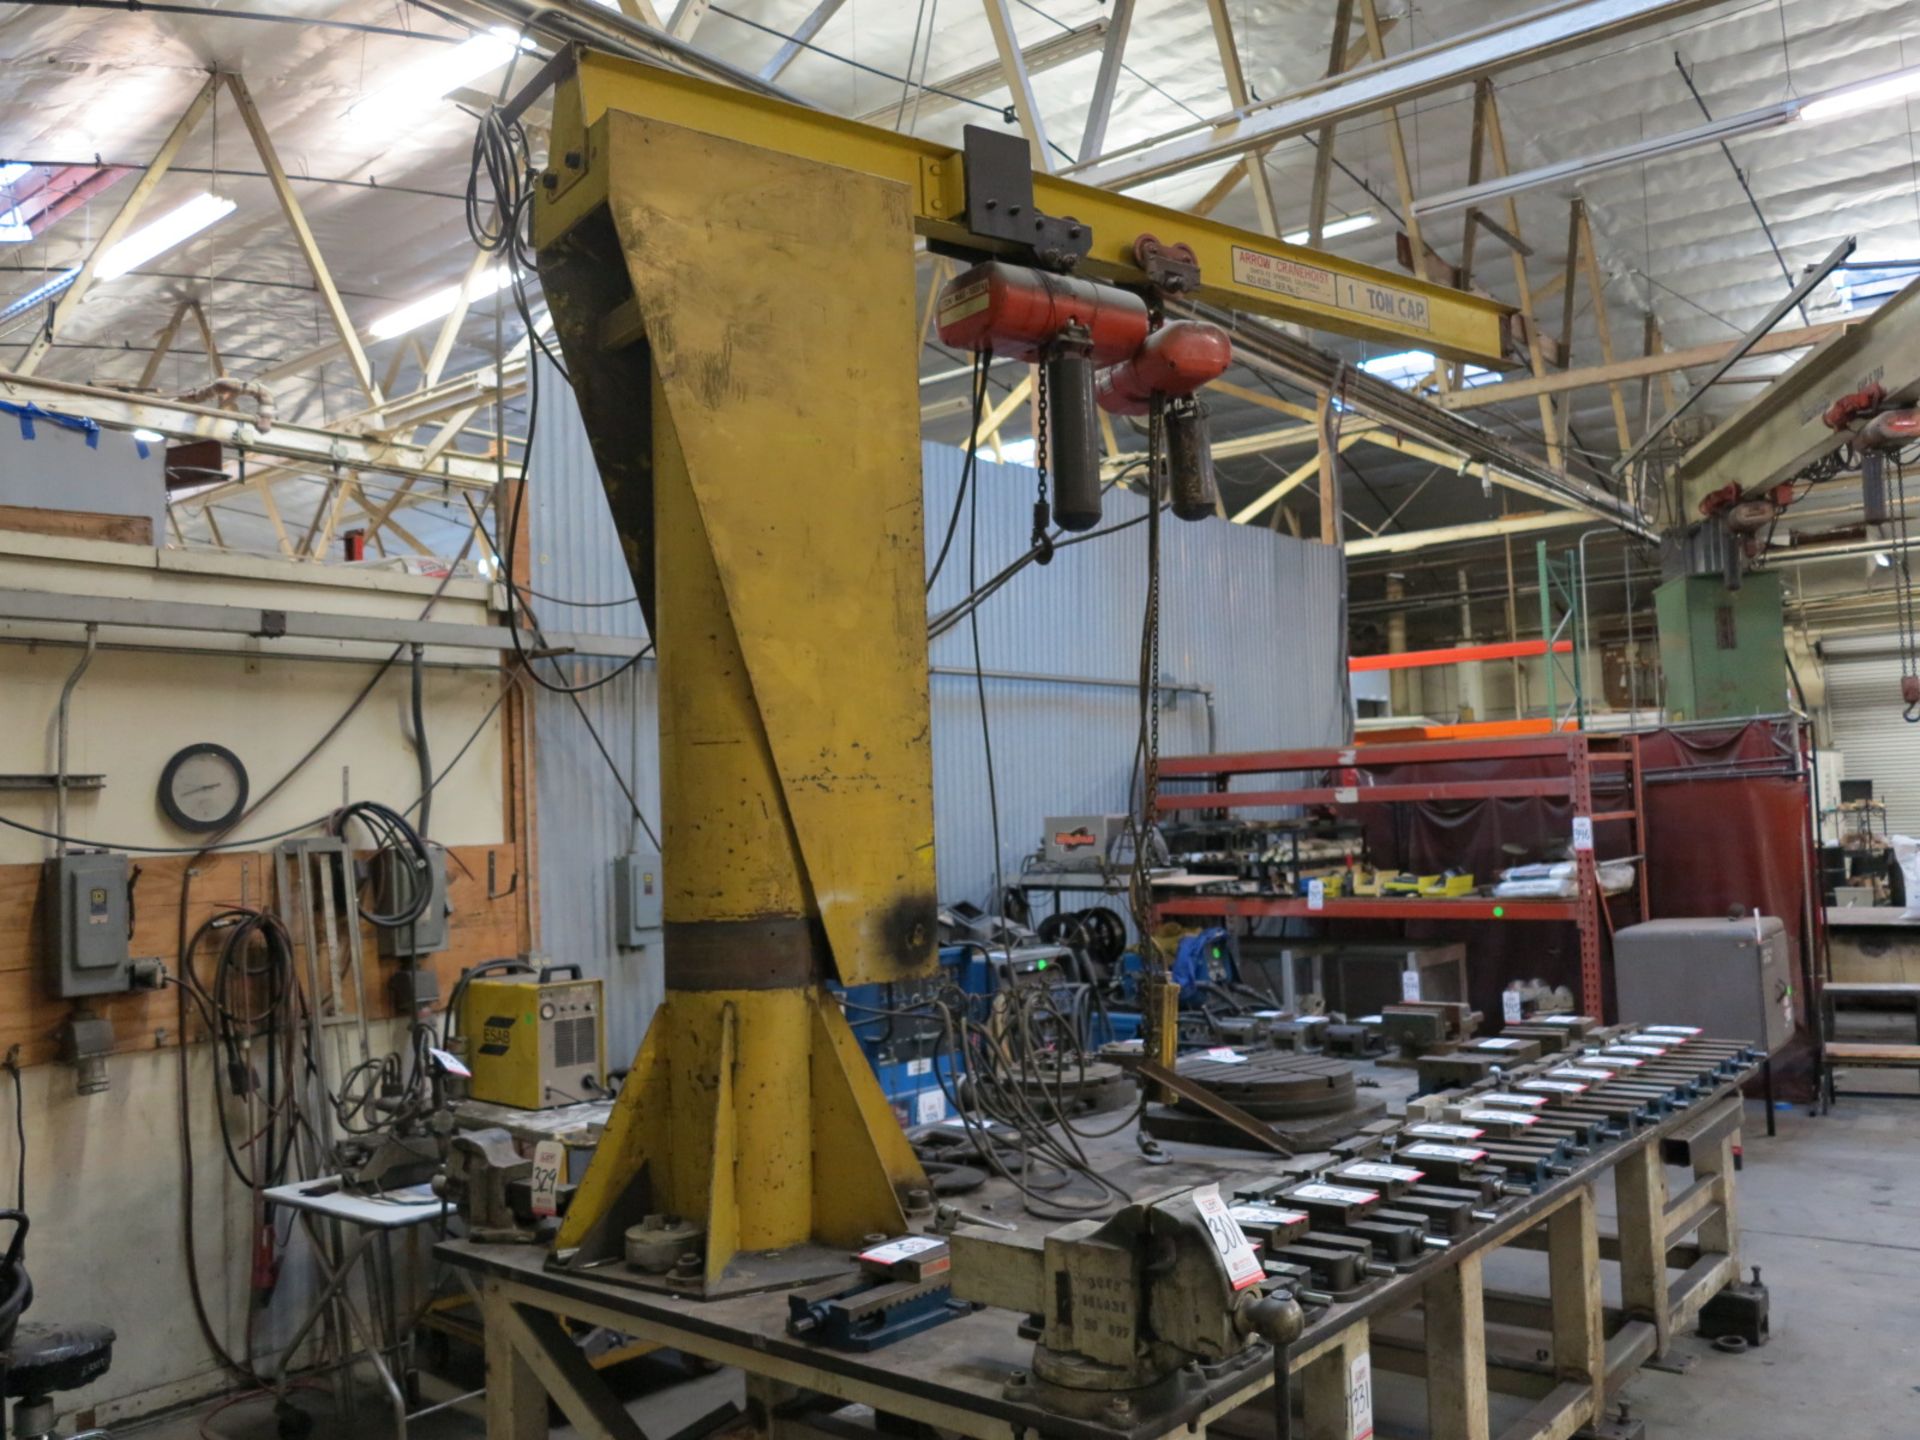 ARROW CRANEHOIST 1-TON 360 DEGREE JIB CRANE, 8' REACH, 94" FROM BASE PLATE TO BOTTOM OF ARM, COMES - Image 3 of 3